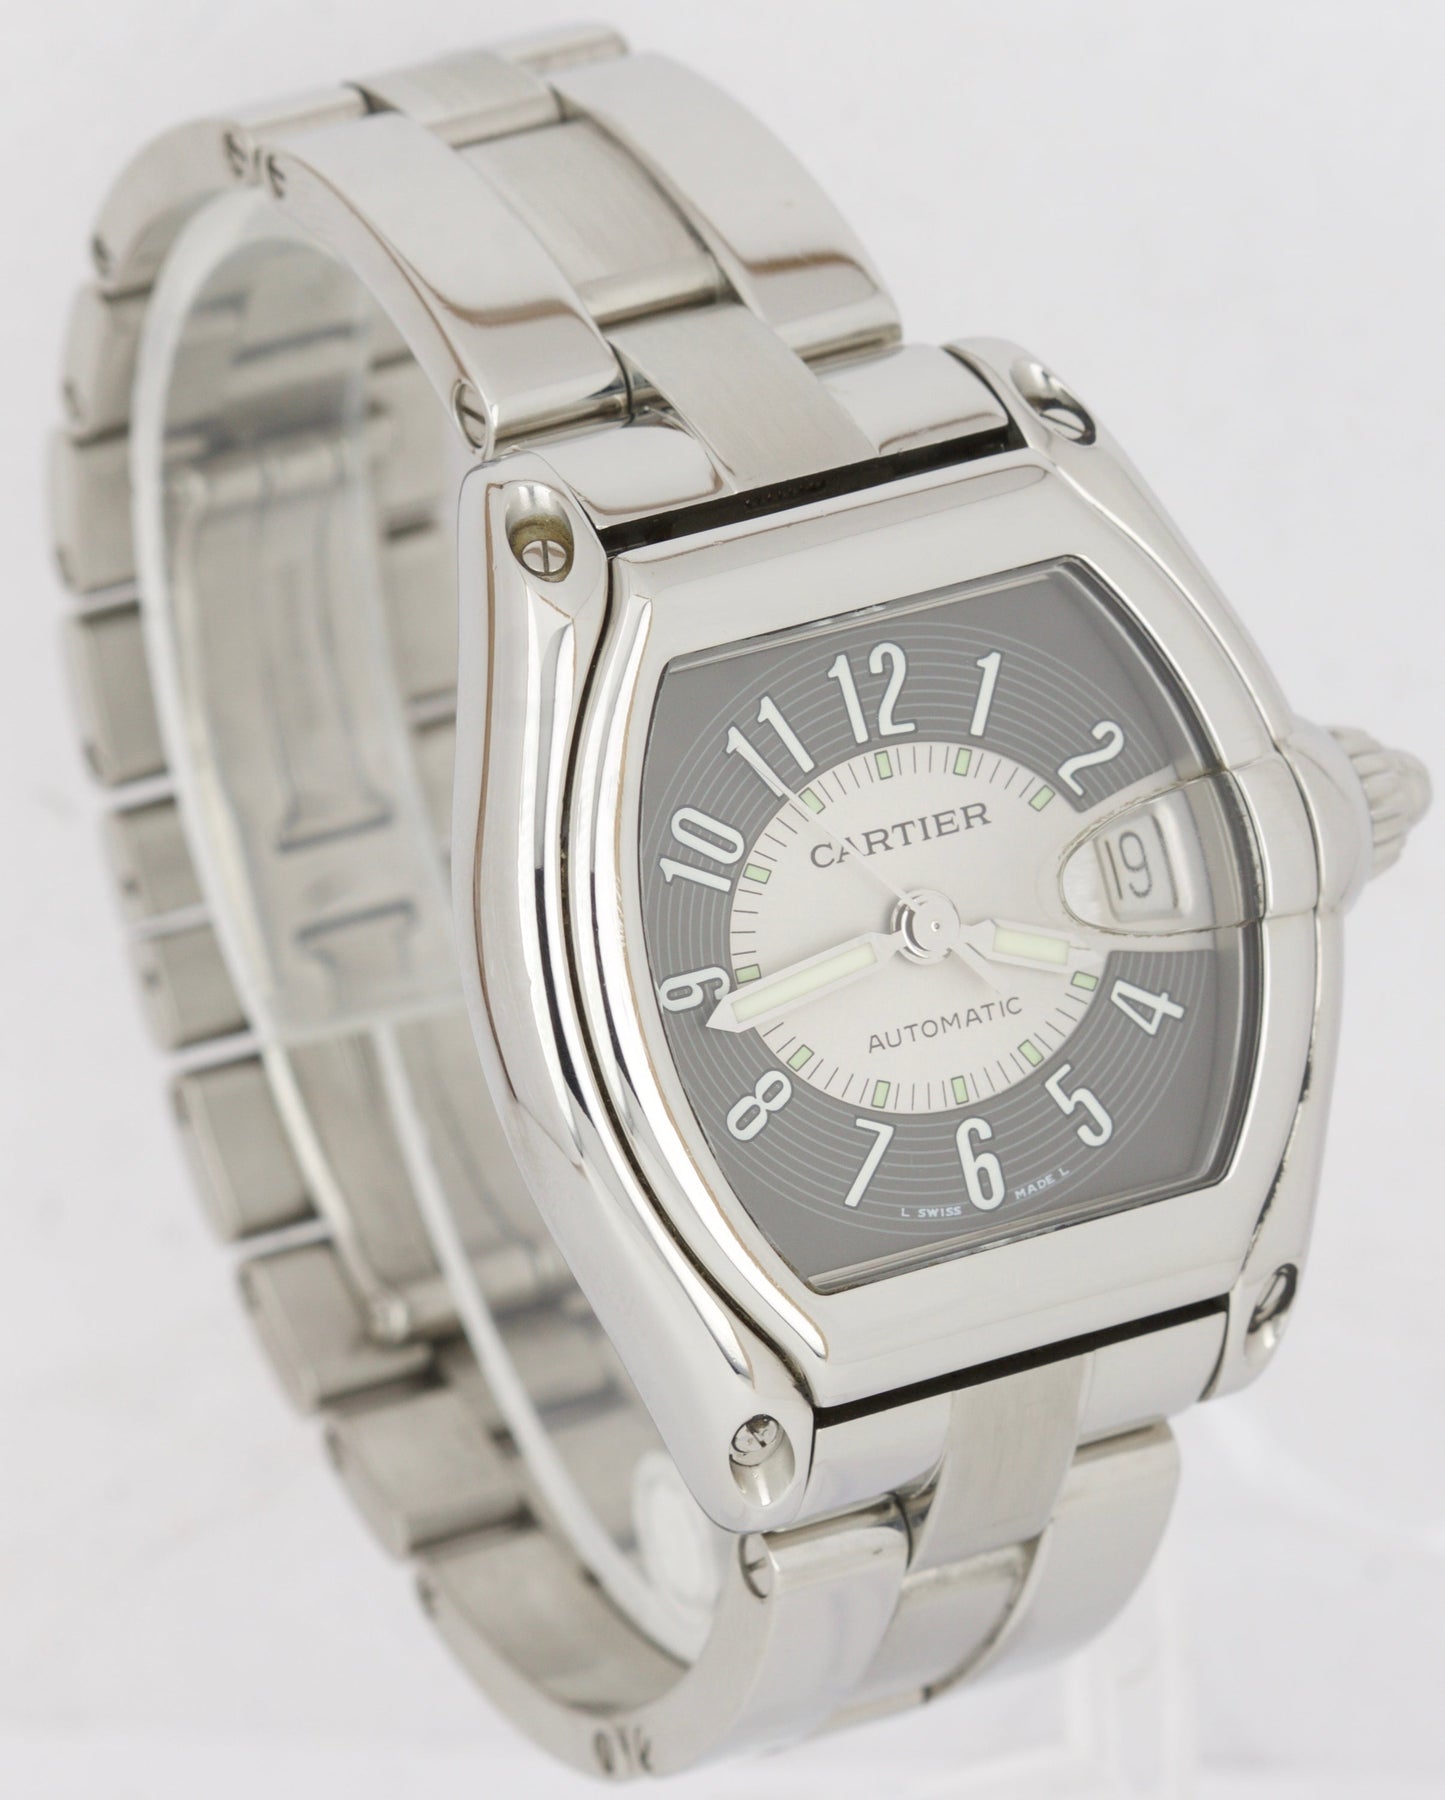 Cartier Roadster Automatic Silver Grey 36mm W62001V3 Stainless Steel Watch 2510